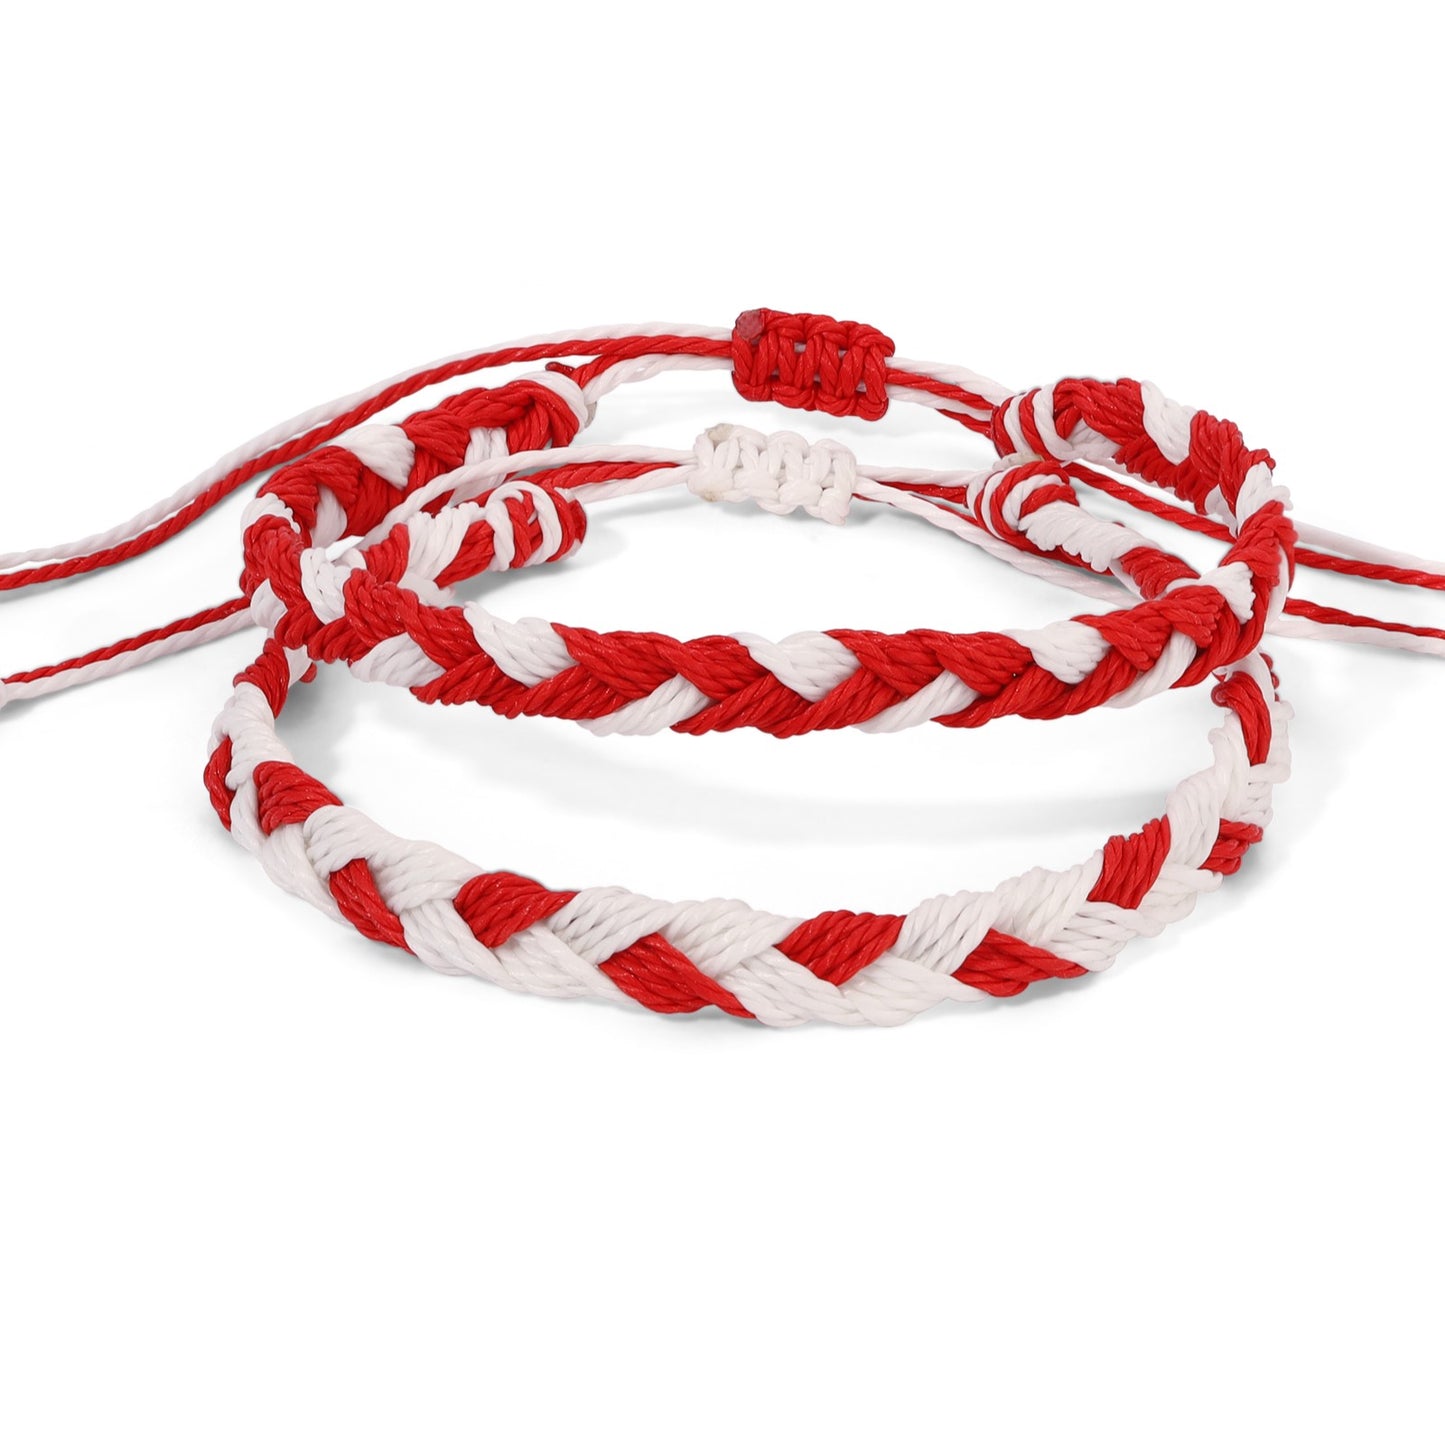 Scarlet and White Team Color Braided Bracelets - Set of 2